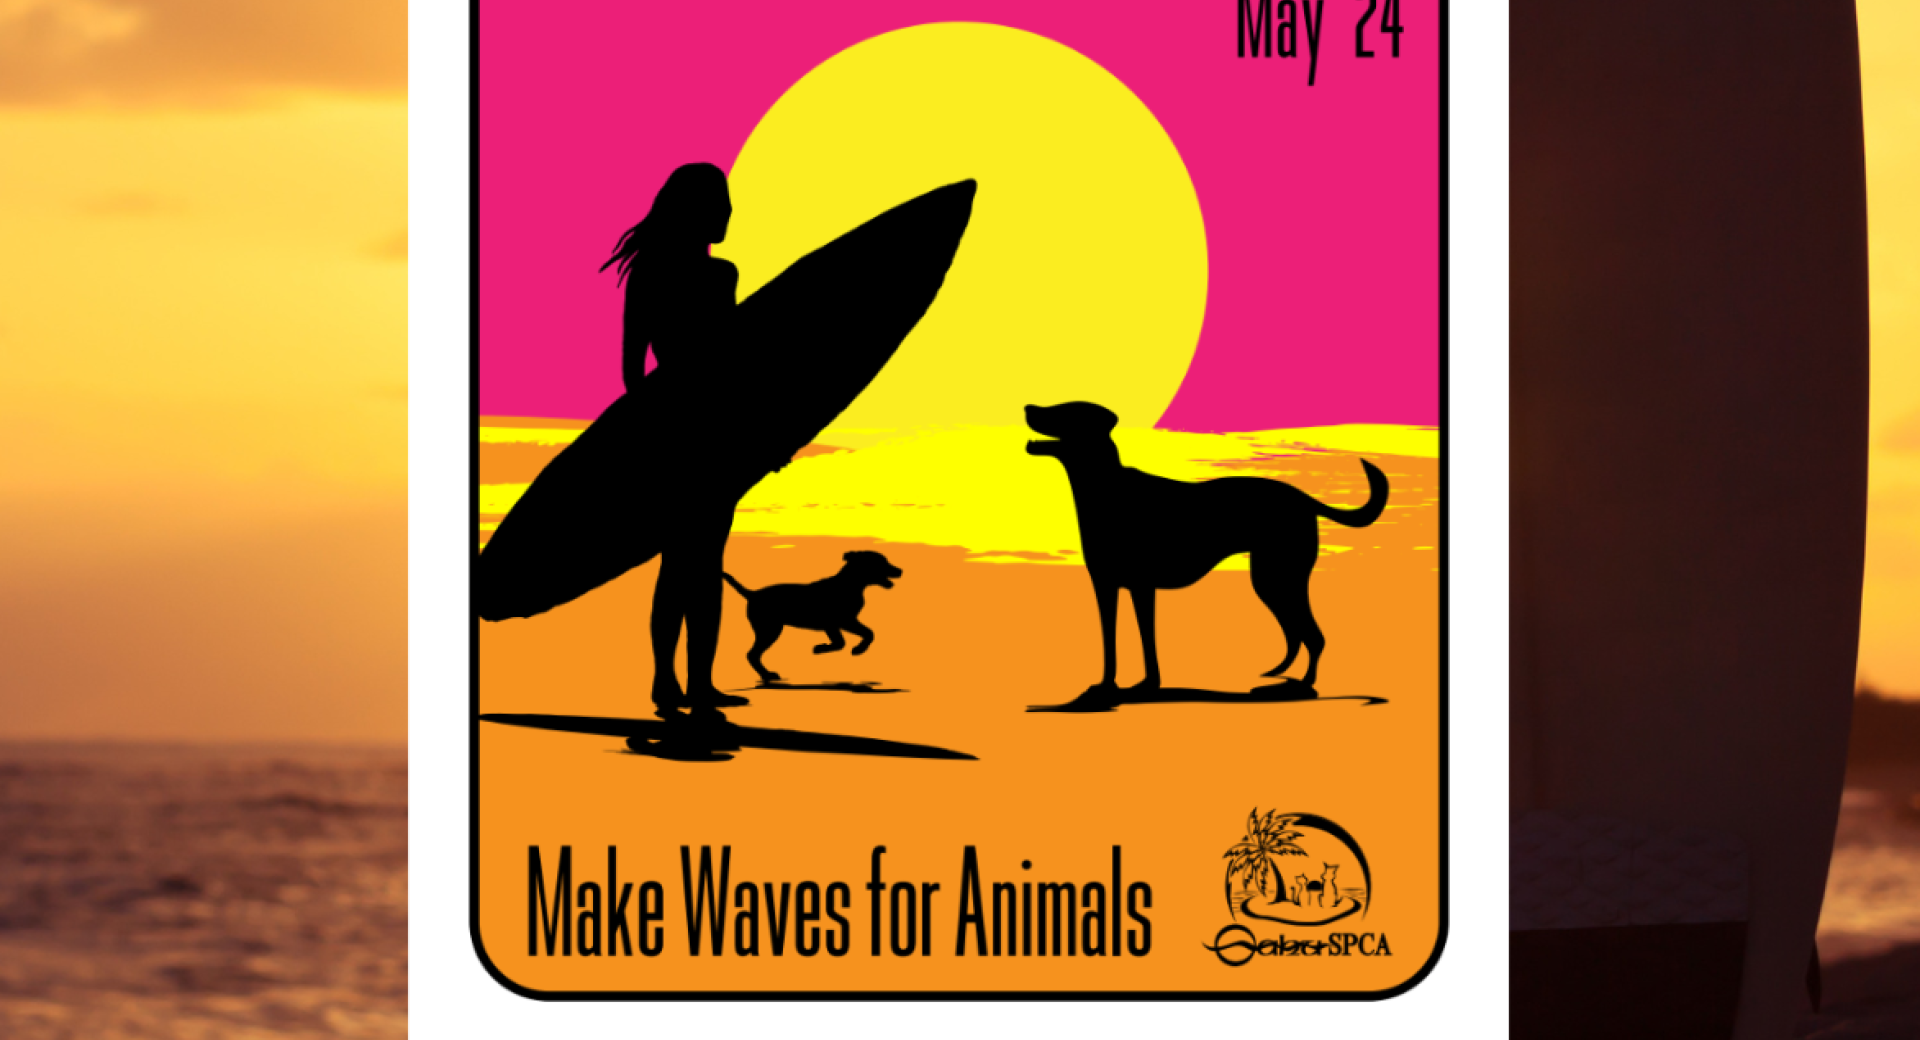 Introducing Oahu SPCA's First Surf & Rescue Event!